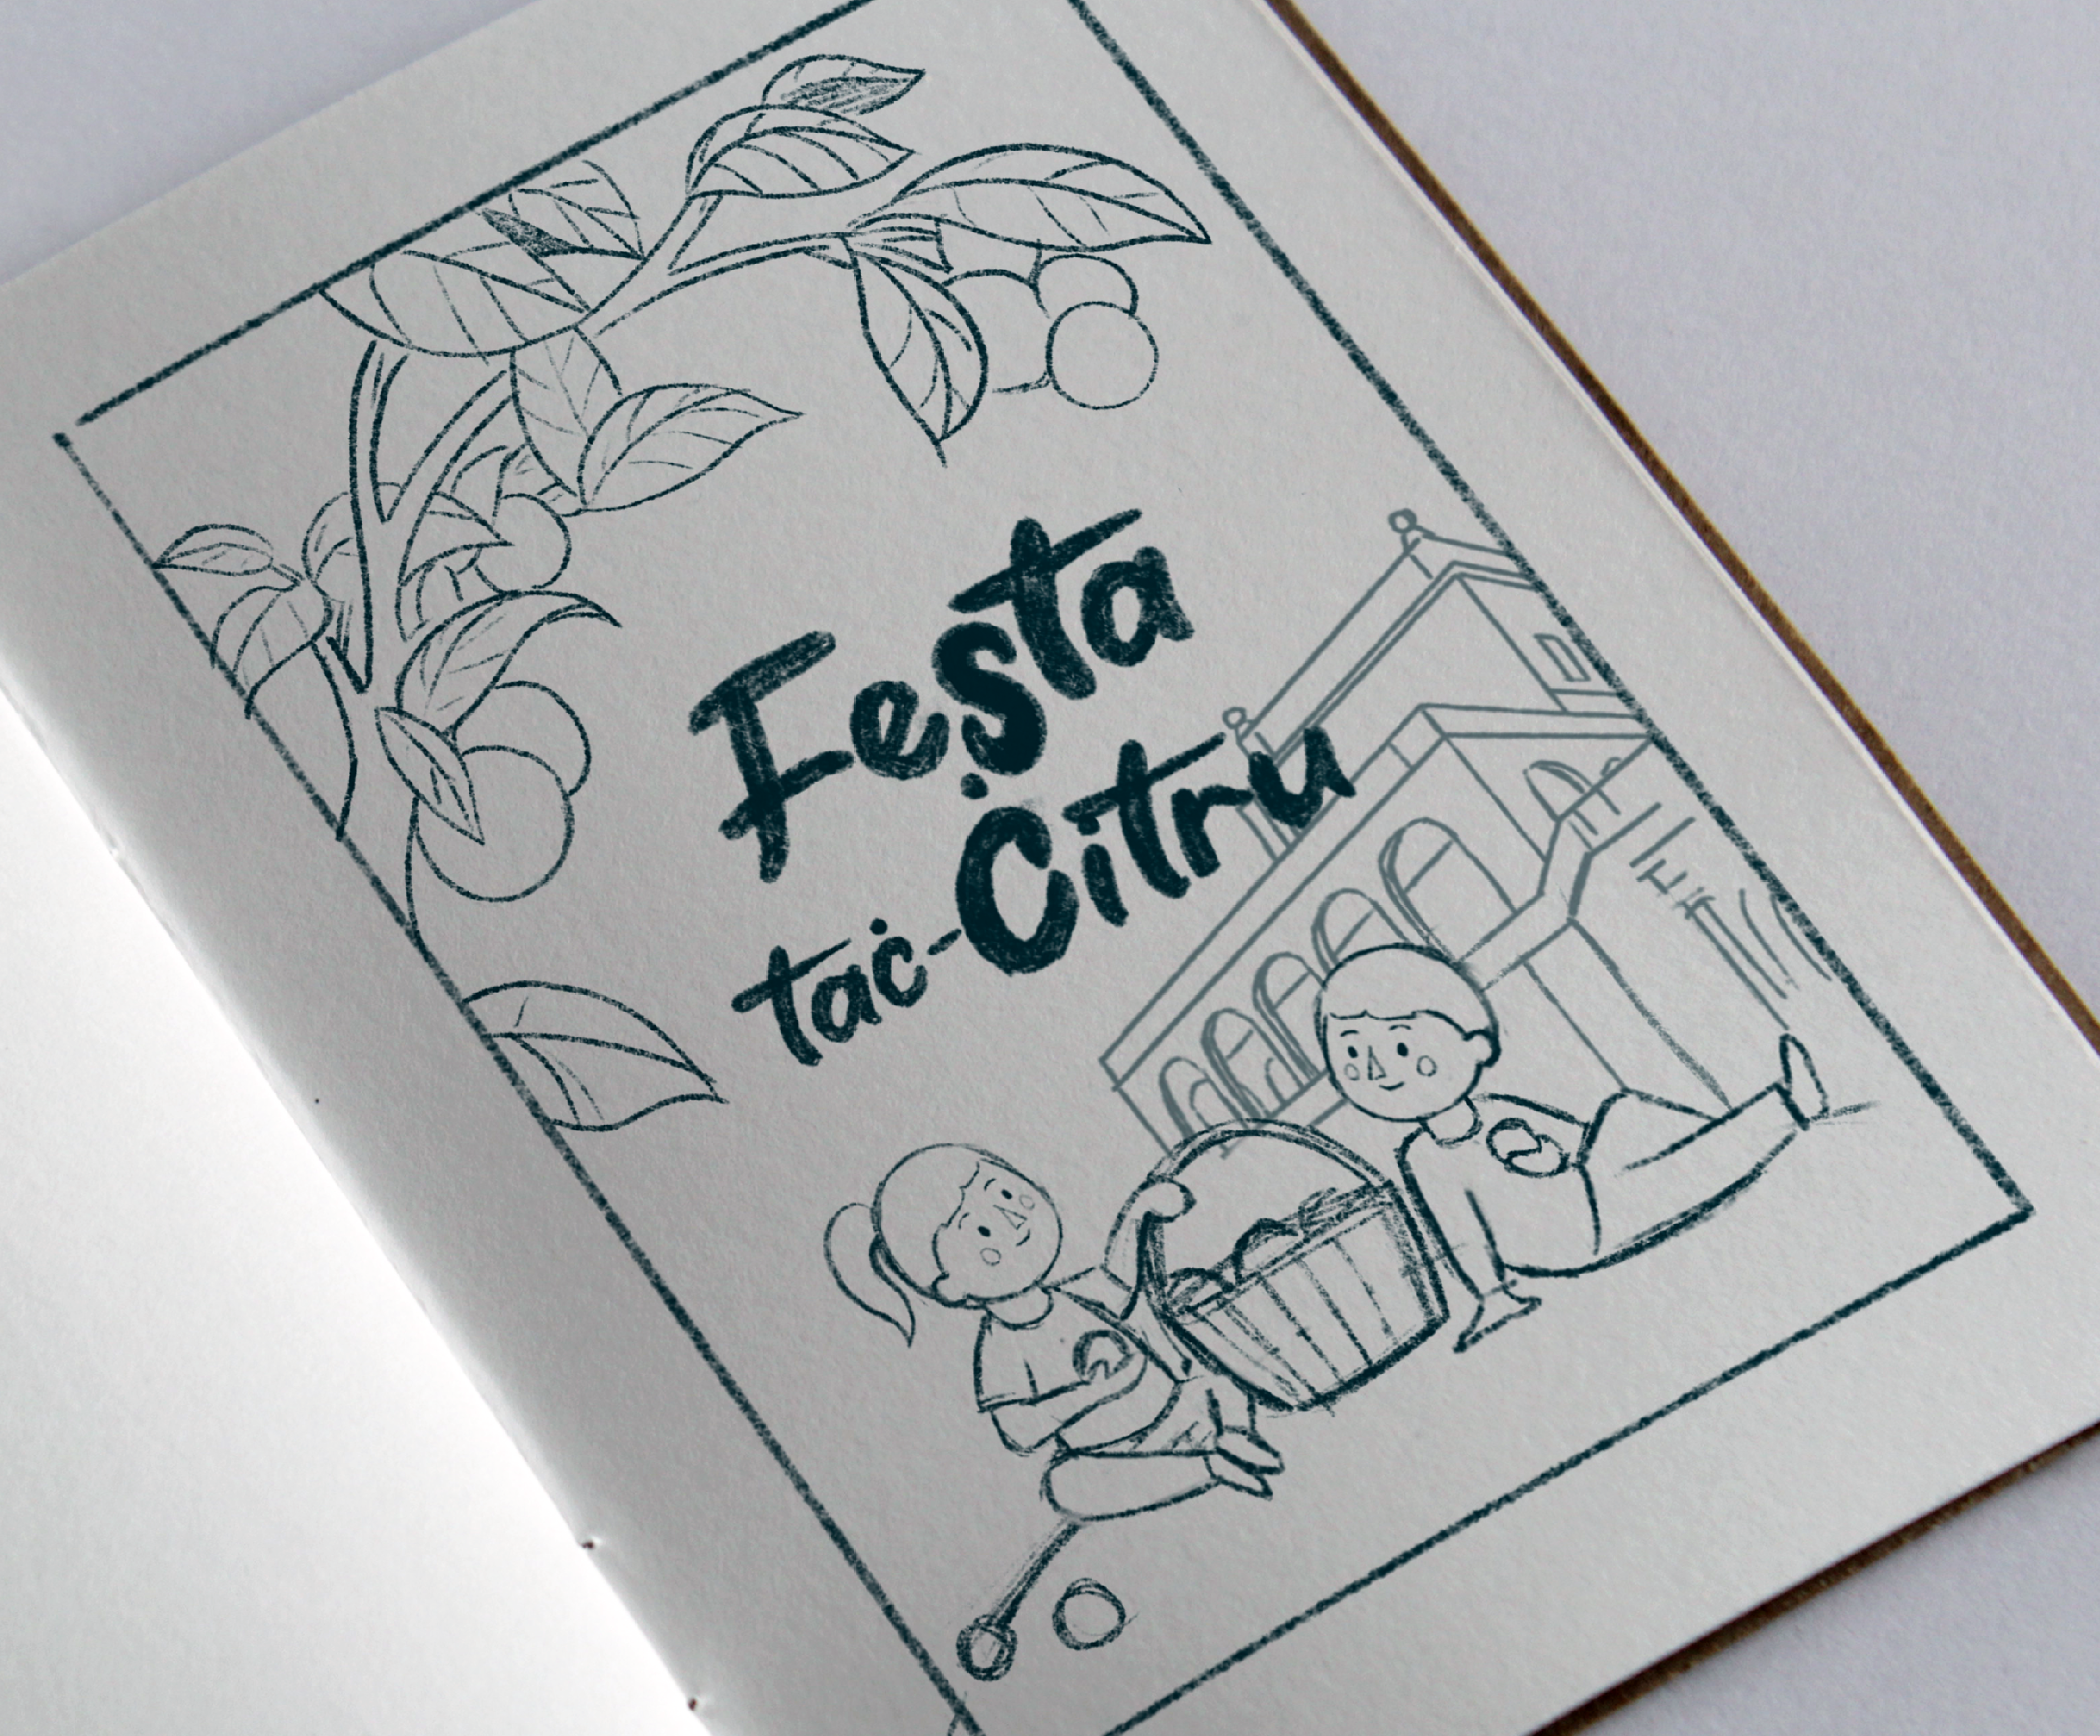 Sketch for main artwork for Festa Citru. It includes two children sitting down with a basket of oranges in between them, with a palace in the background.